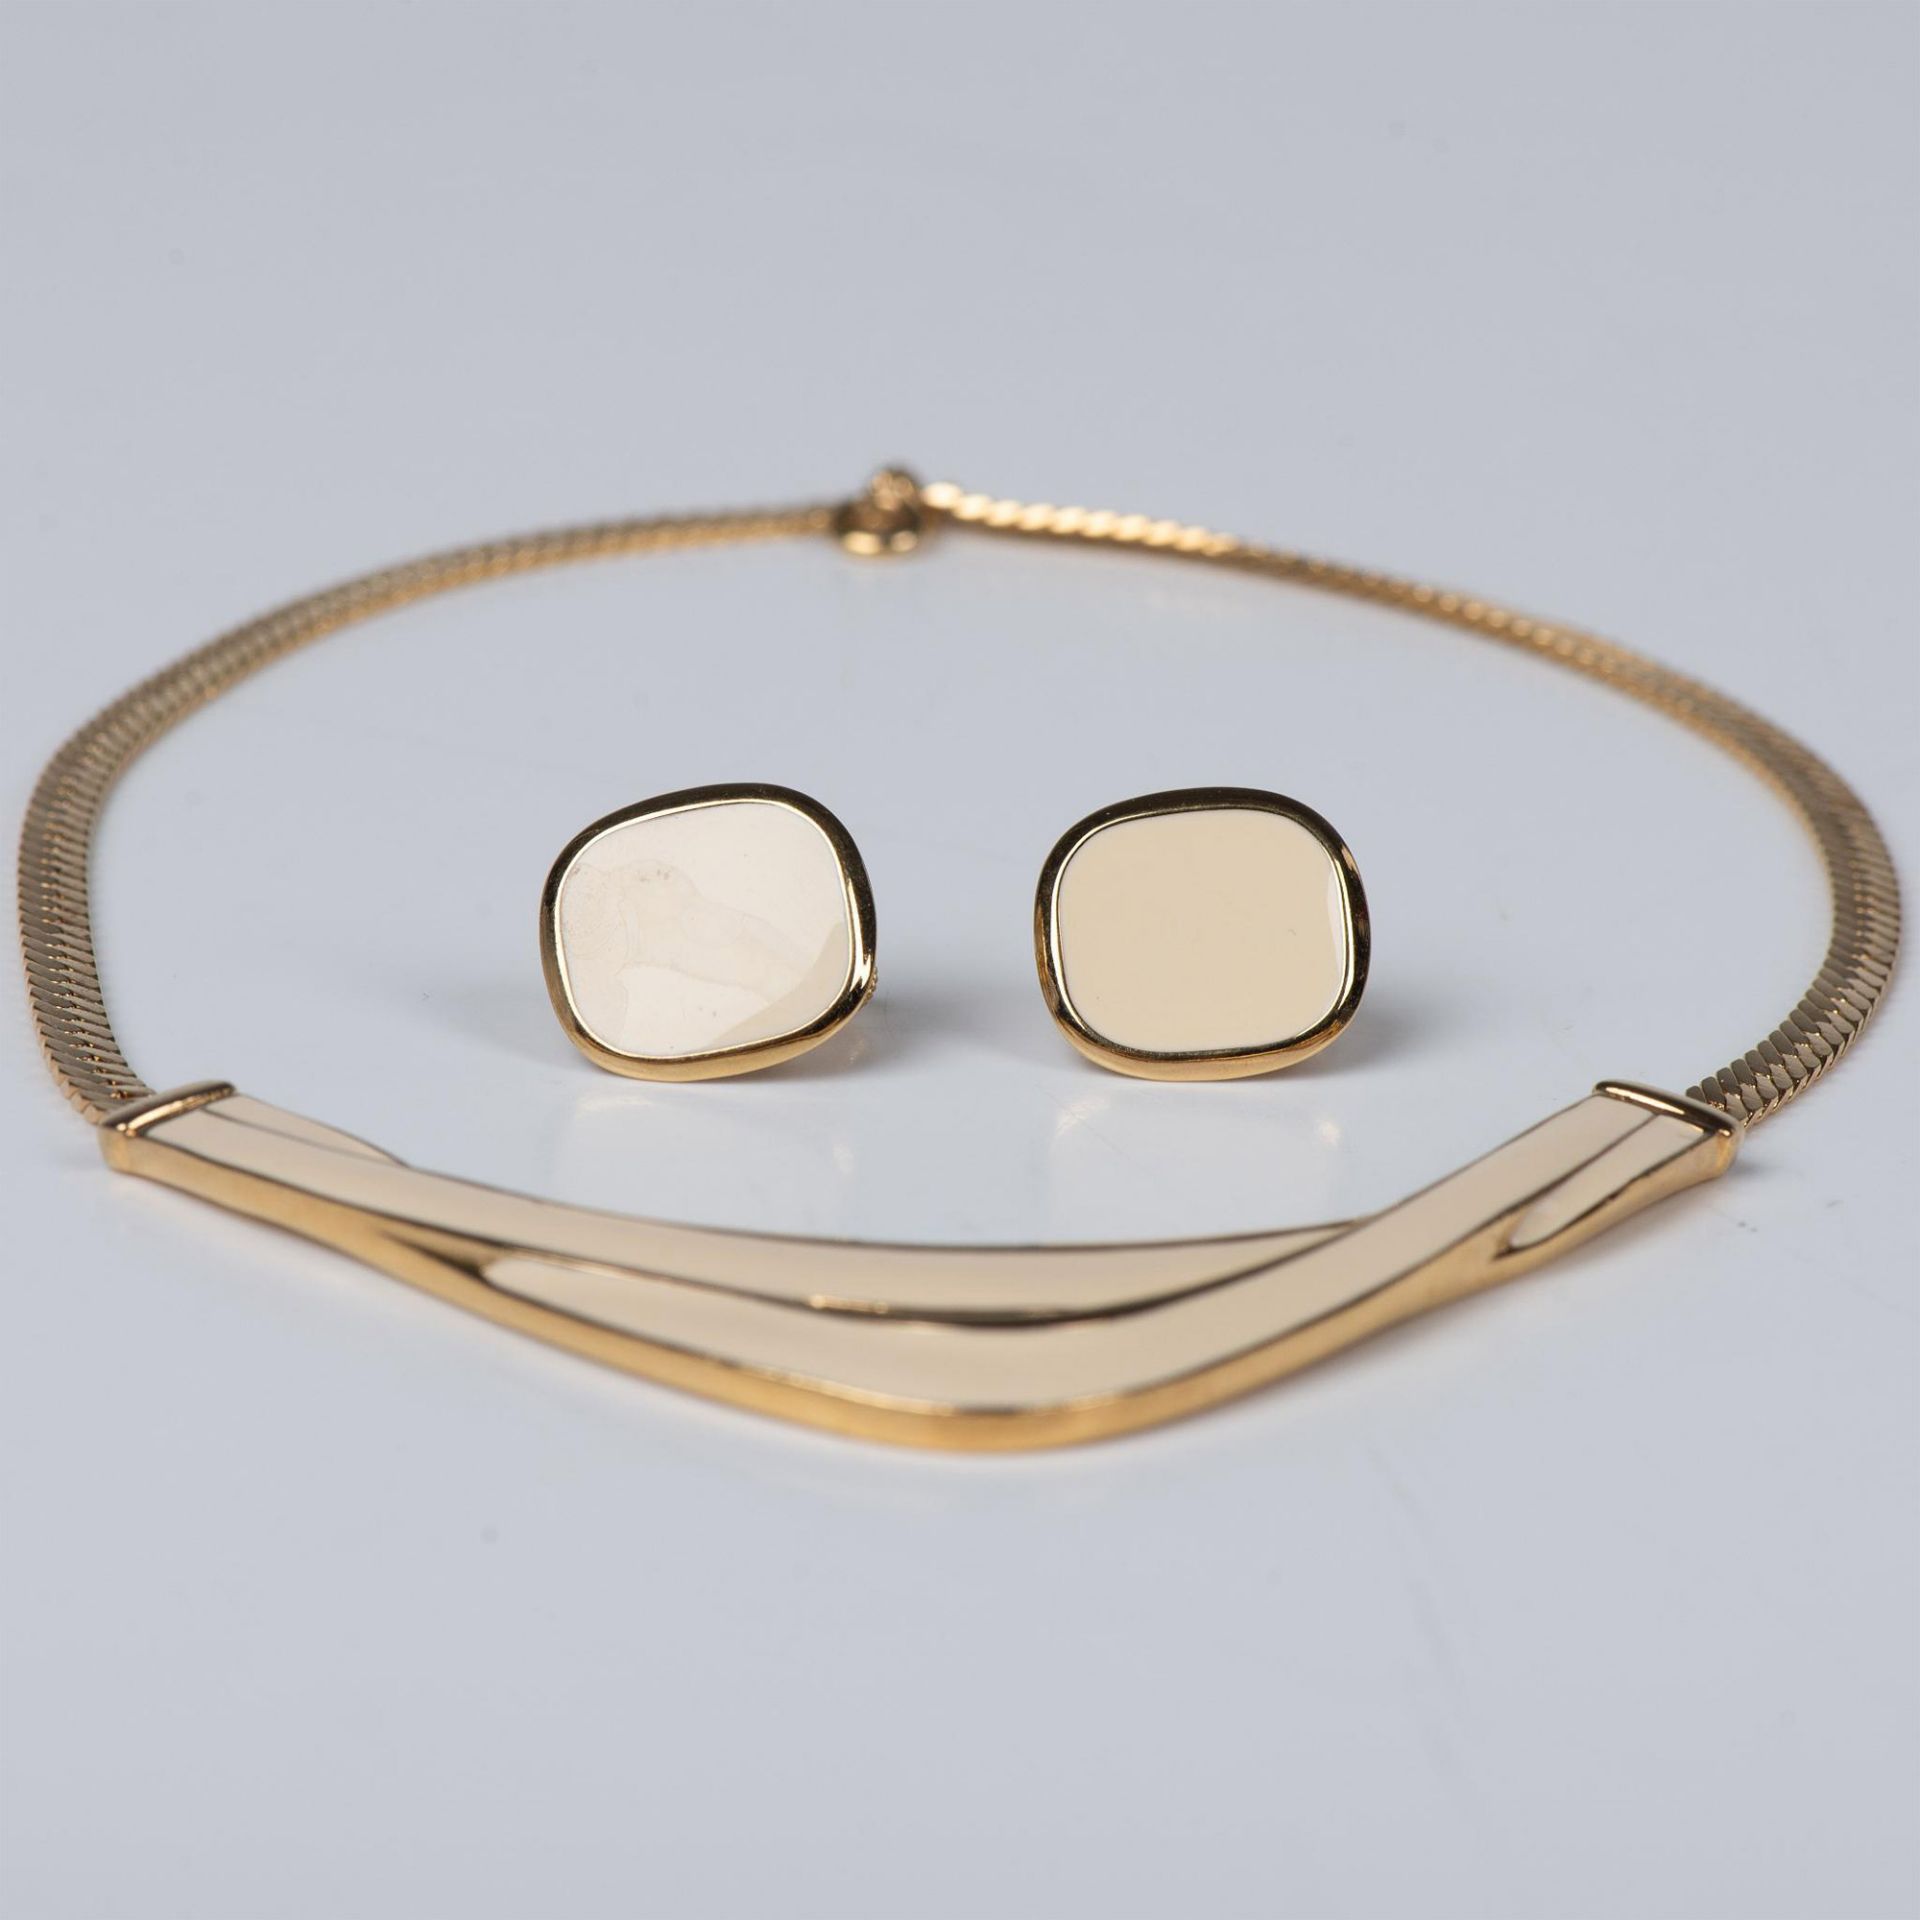 3pc Enamel & Gold Tone Necklace and Earrings - Image 2 of 6